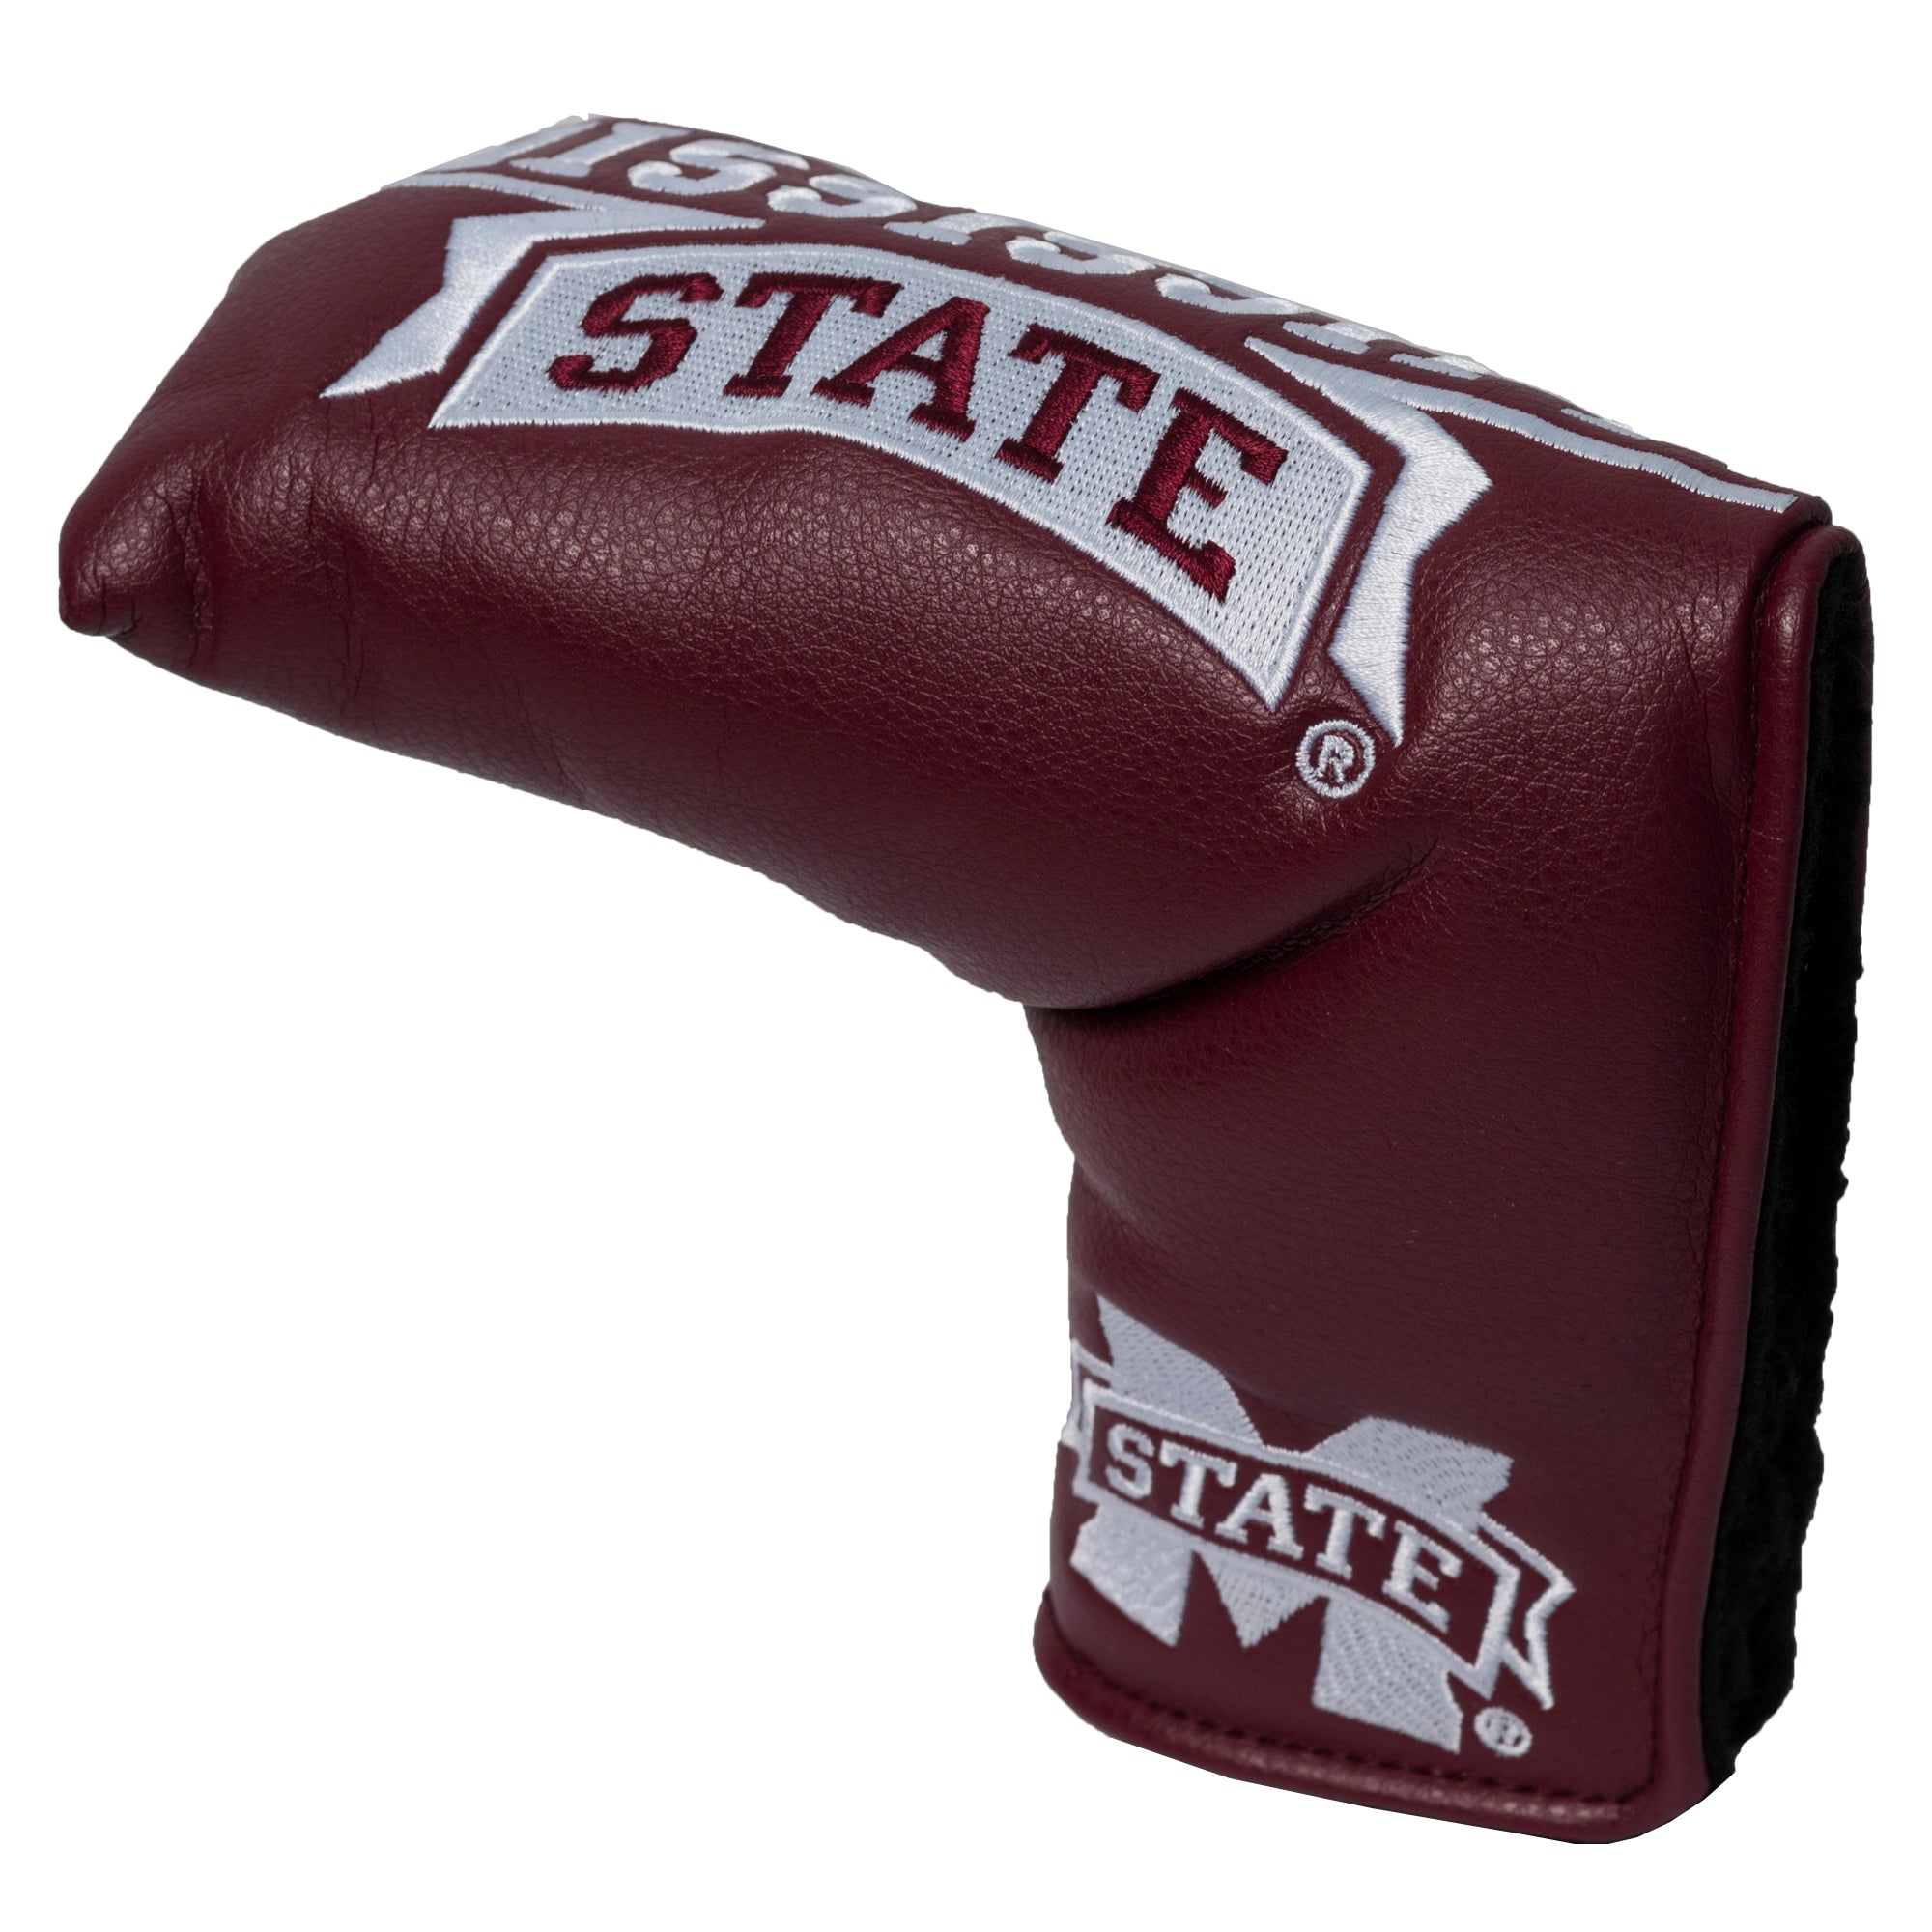 Mississippi State Bulldogs Tour Blade Putter Cover